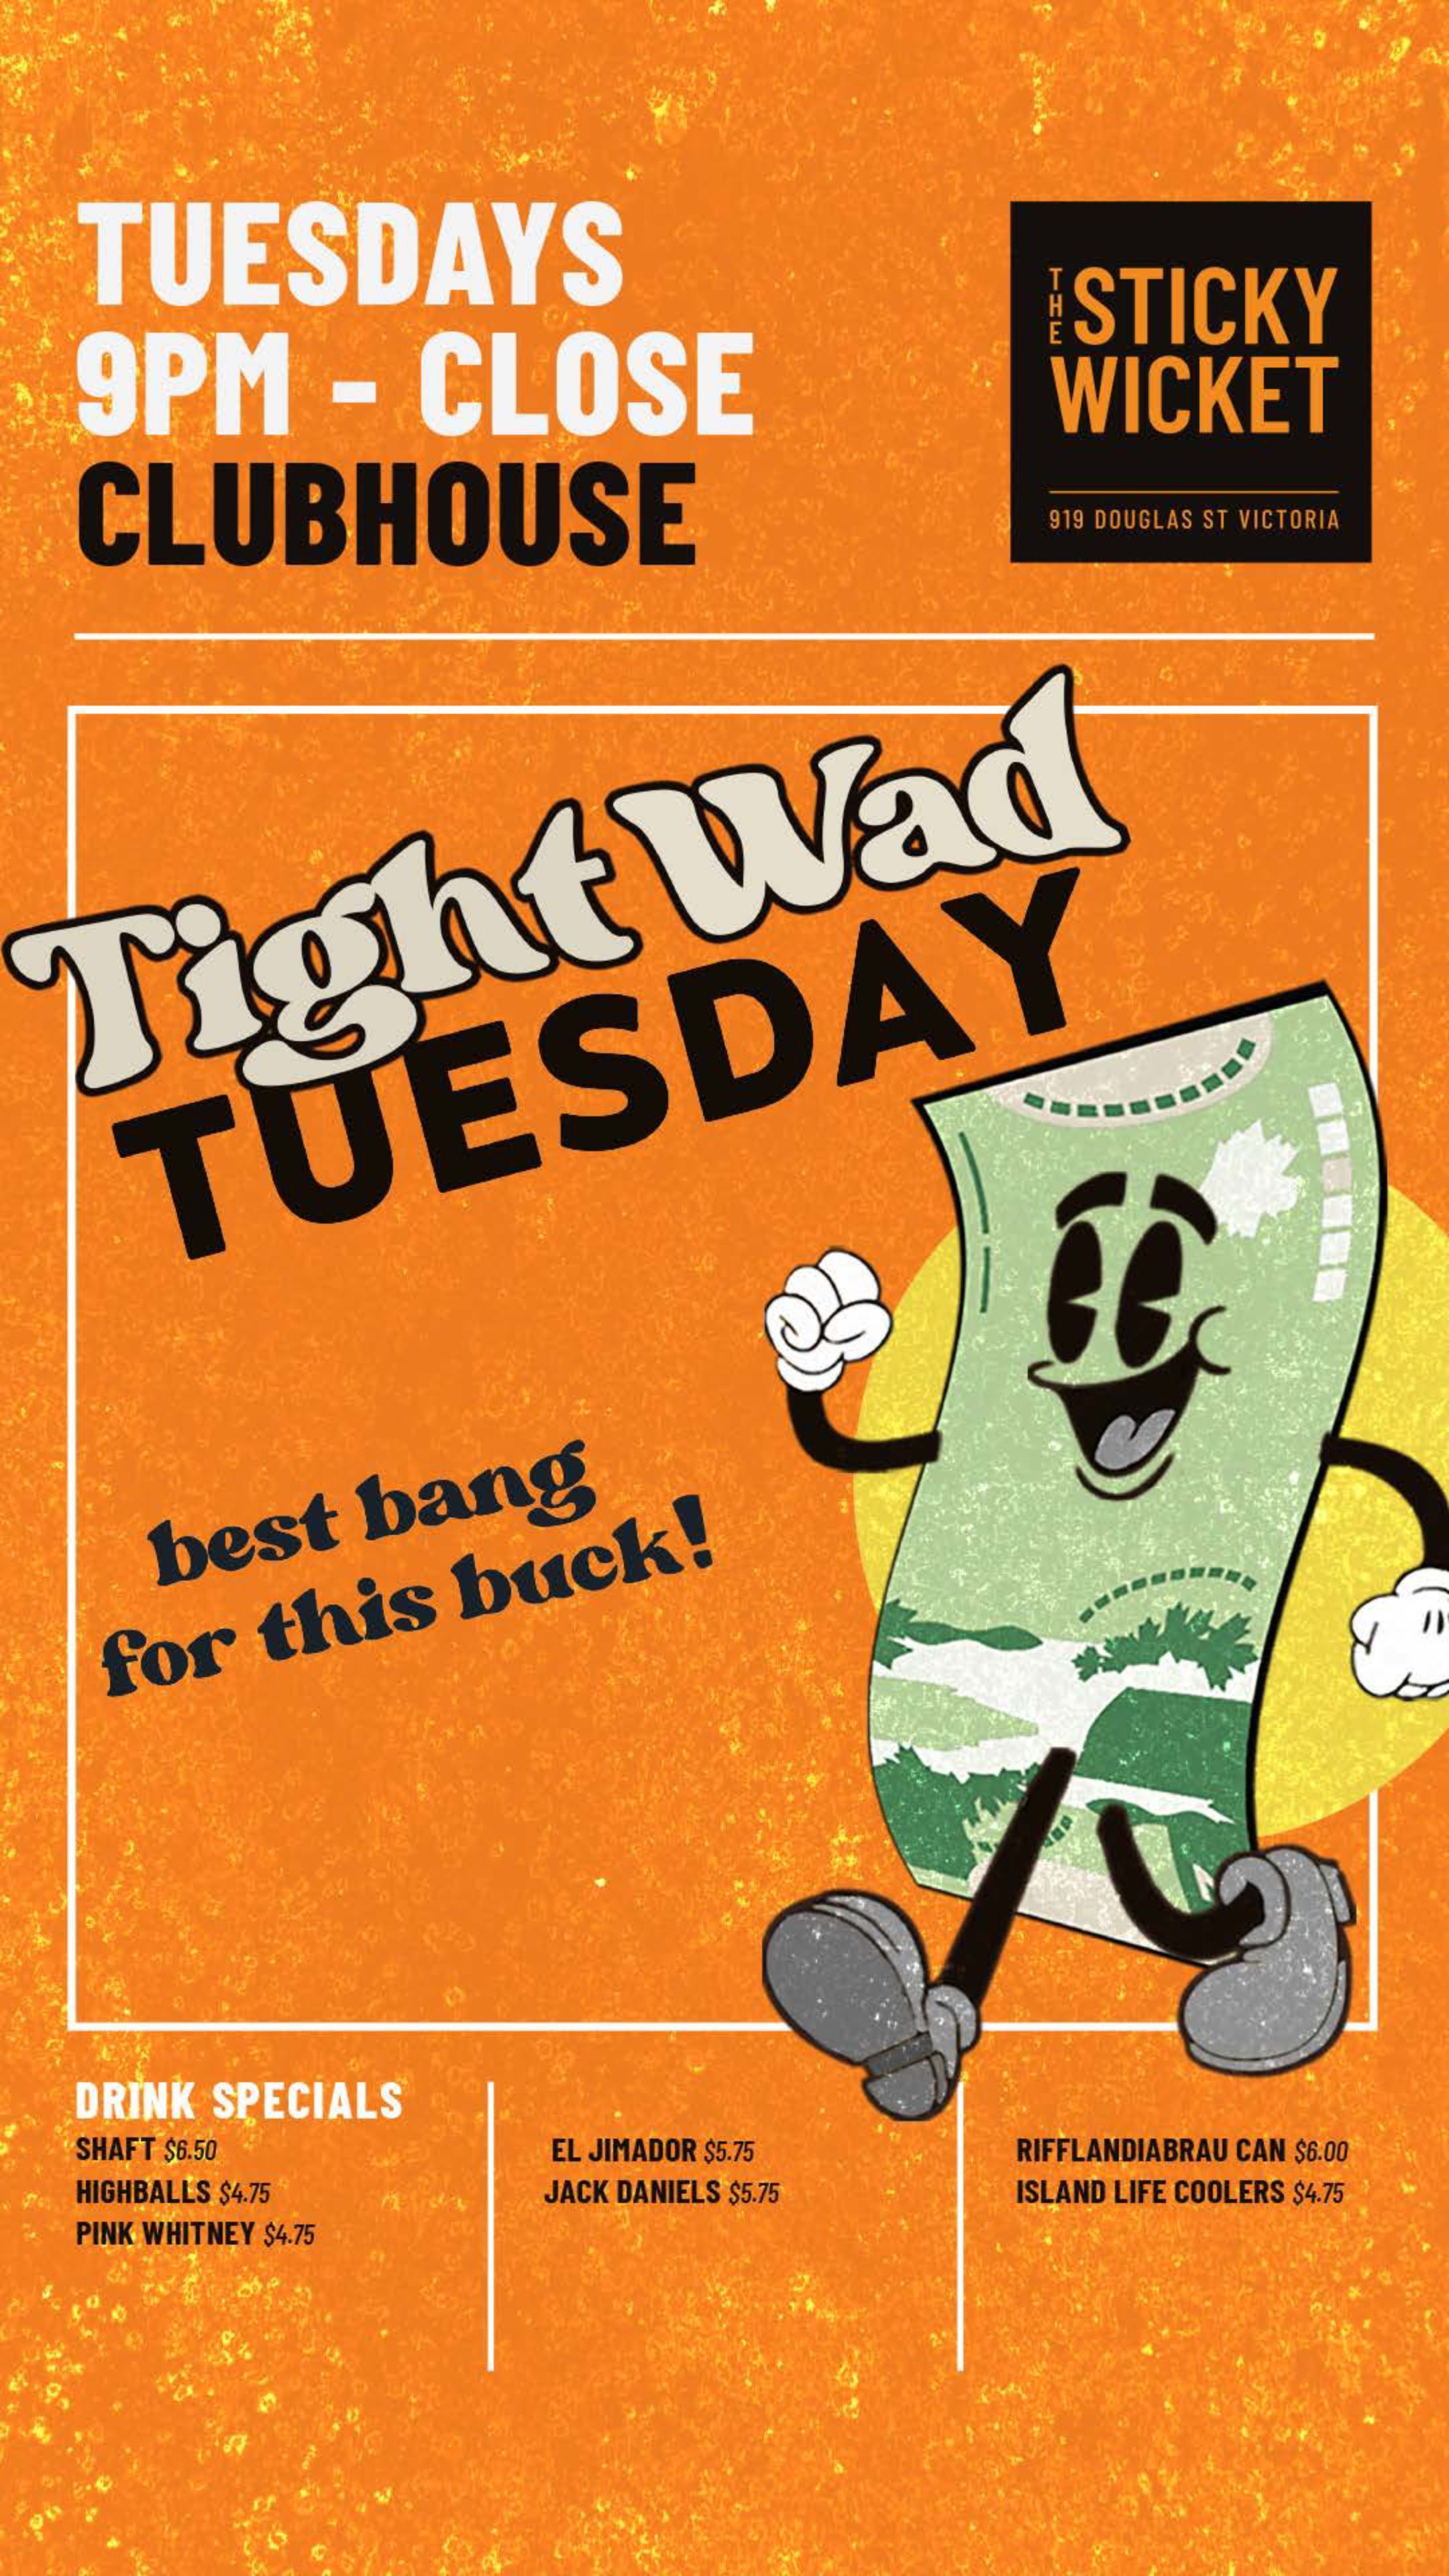 Tight Wad Tuesday INSTAGRAM STORY